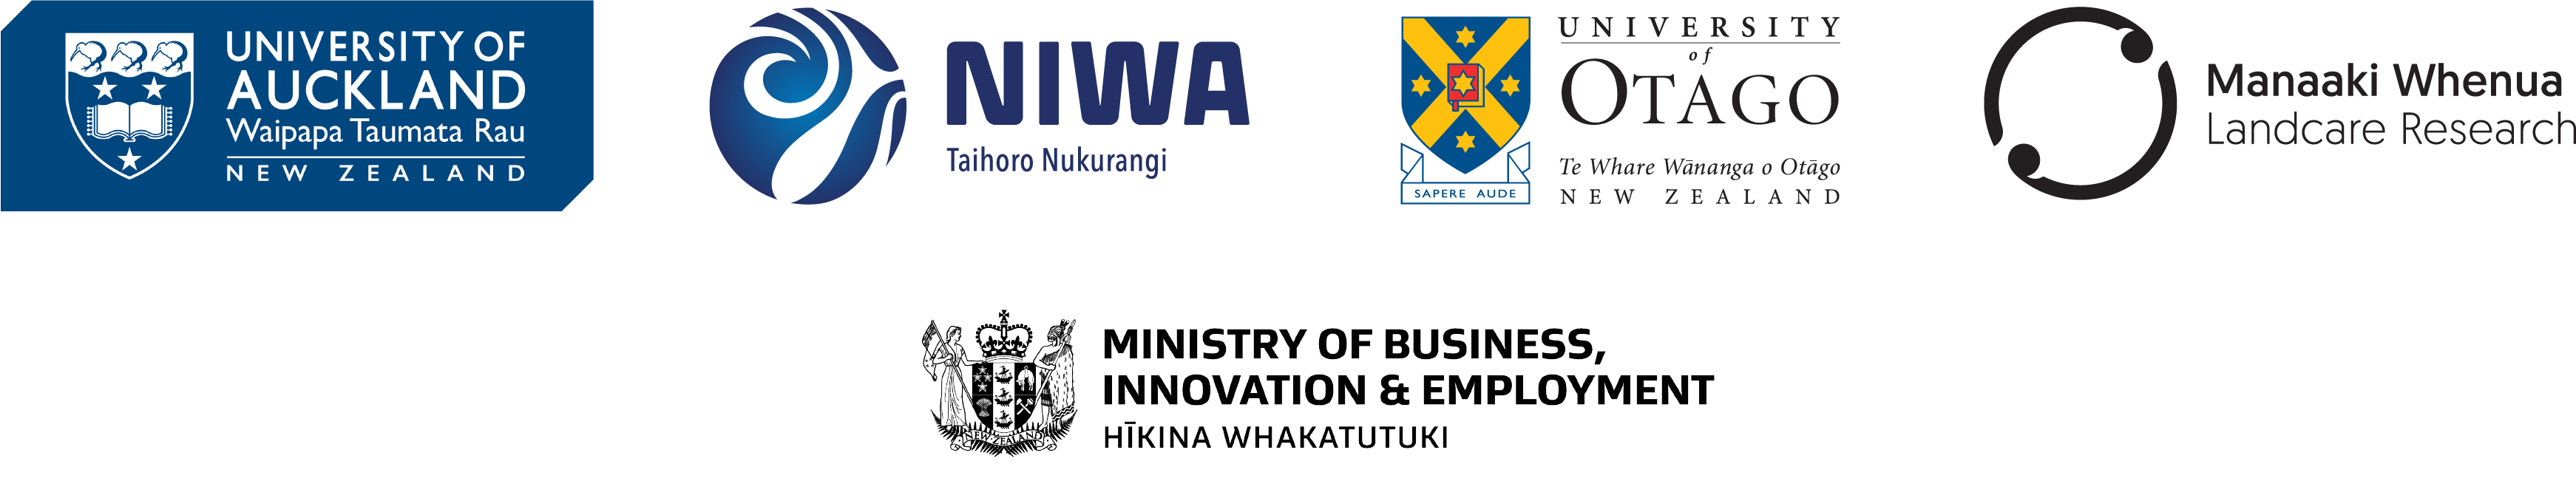 Logos of the University of Auckland, NIWA, University of Otago, Manaaki Whenua - Landcare Research, and MBIE